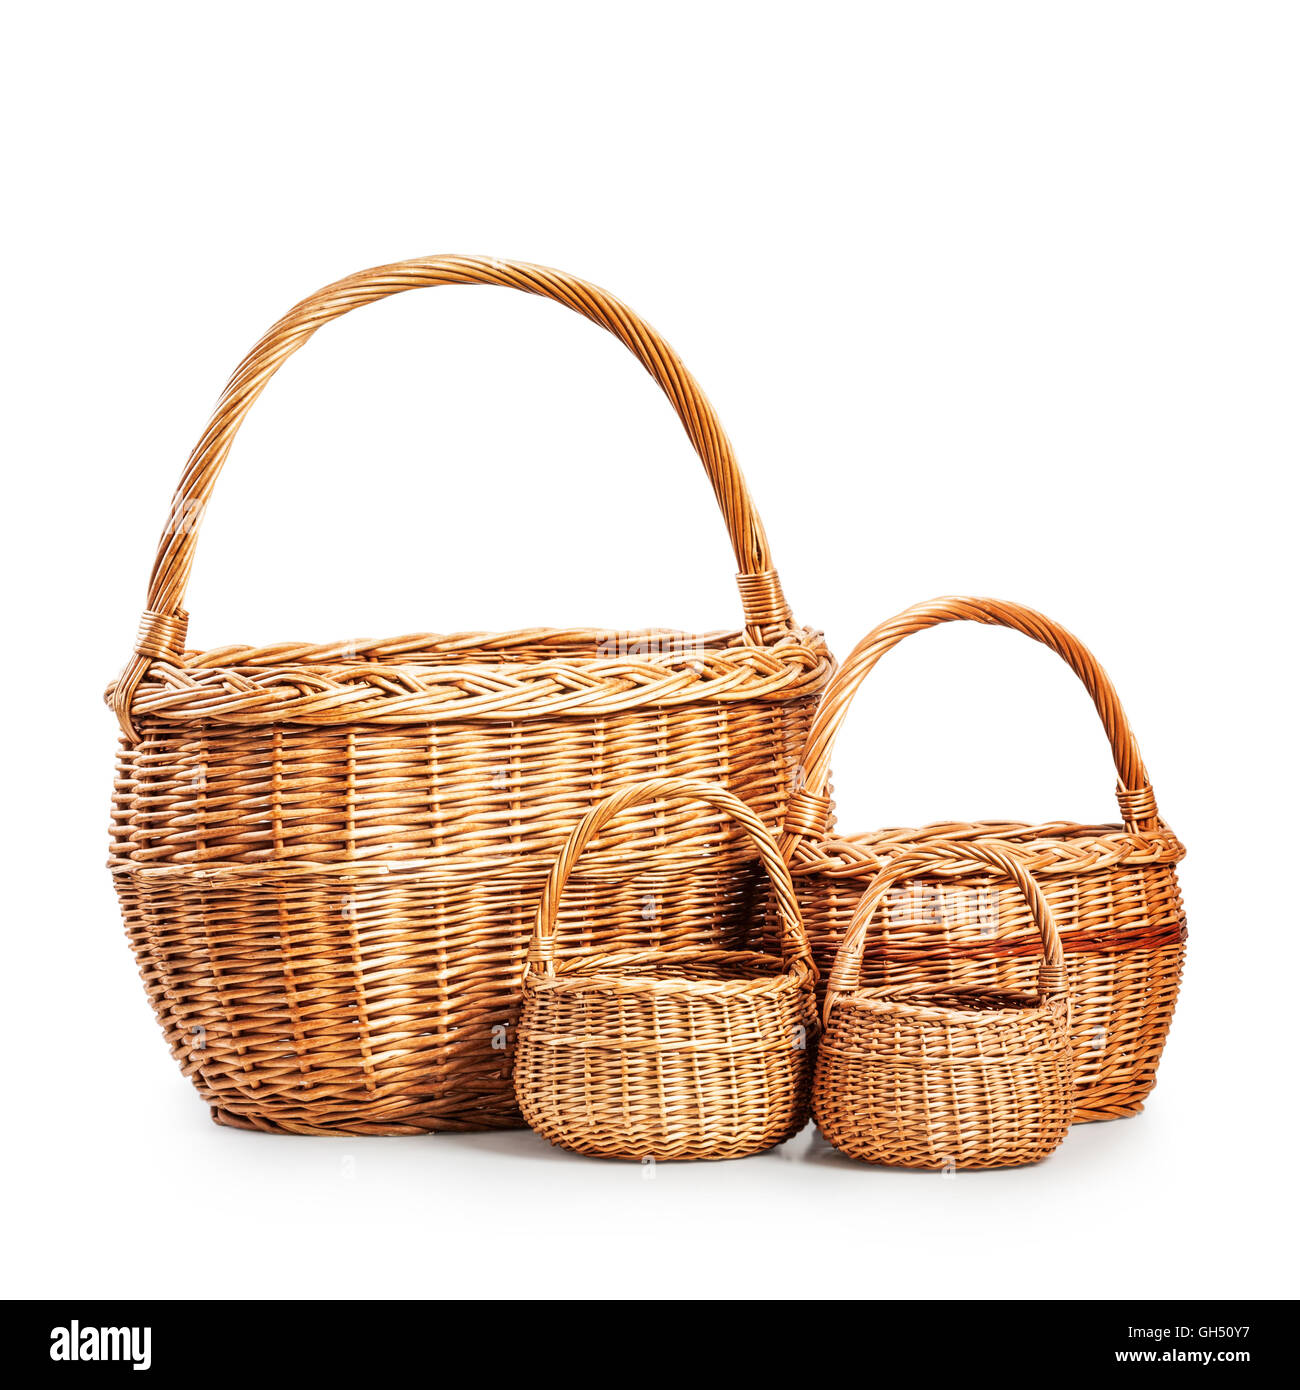 Empty wicker baskets. Objects group isolated on white background with clipping path Stock Photo